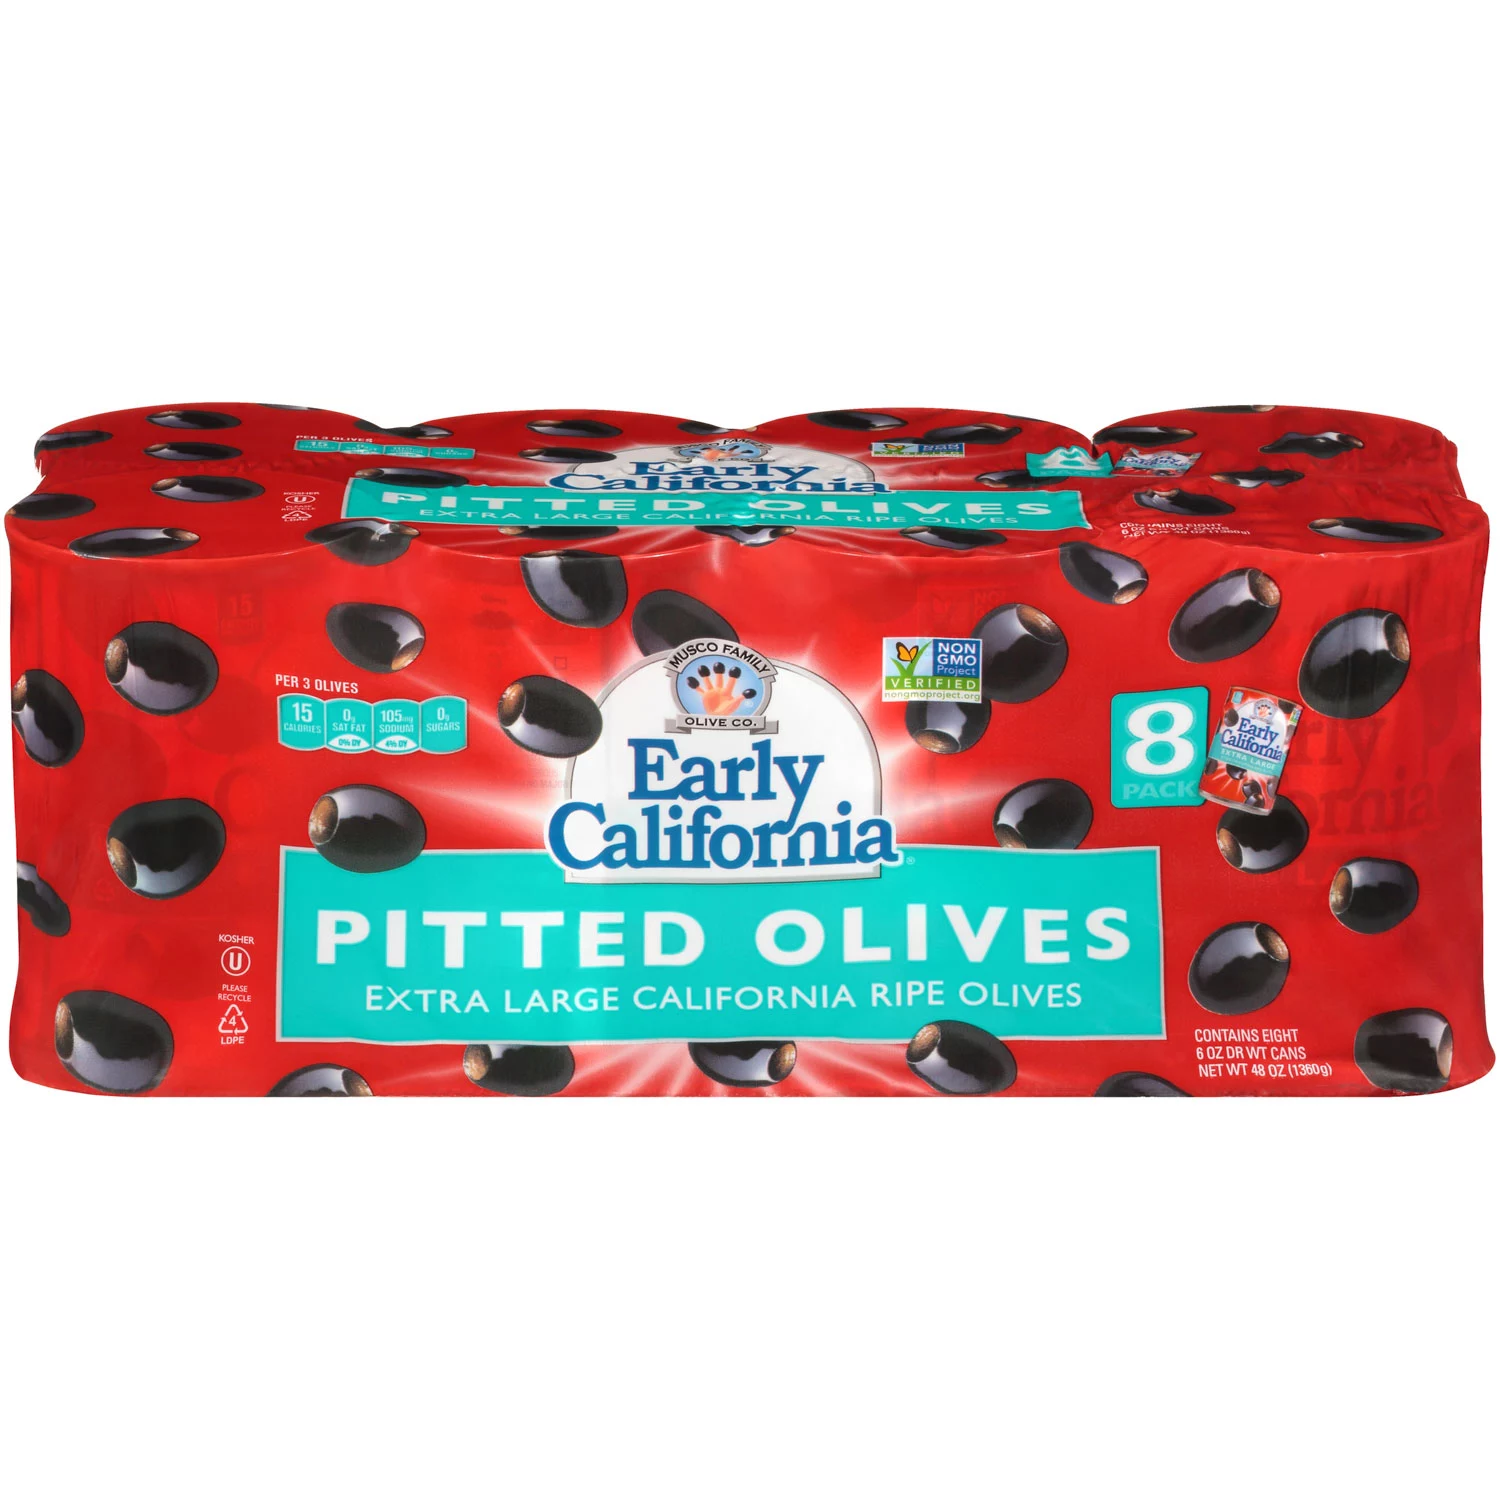 Early California Extra Large Black Pitted Olives (6 oz., 8 pk.)